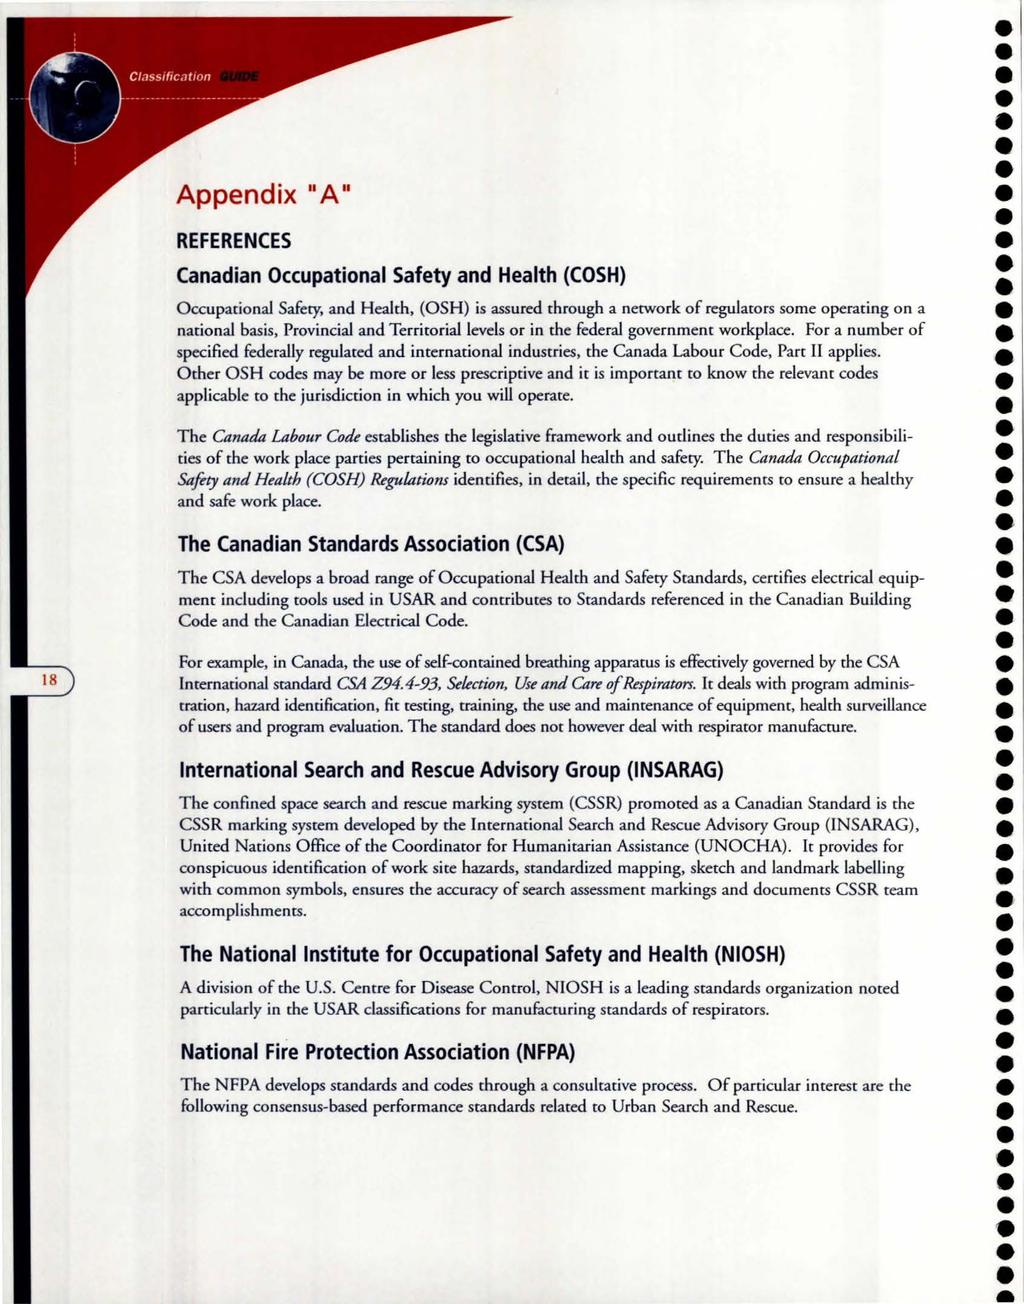 Appendix "A" REFERENCES Canadian Occupational Safety and Health (COSH) Occupational Safety, and Health, (OSH) is assured through a network of regulators some operating on a national basis, Provincial